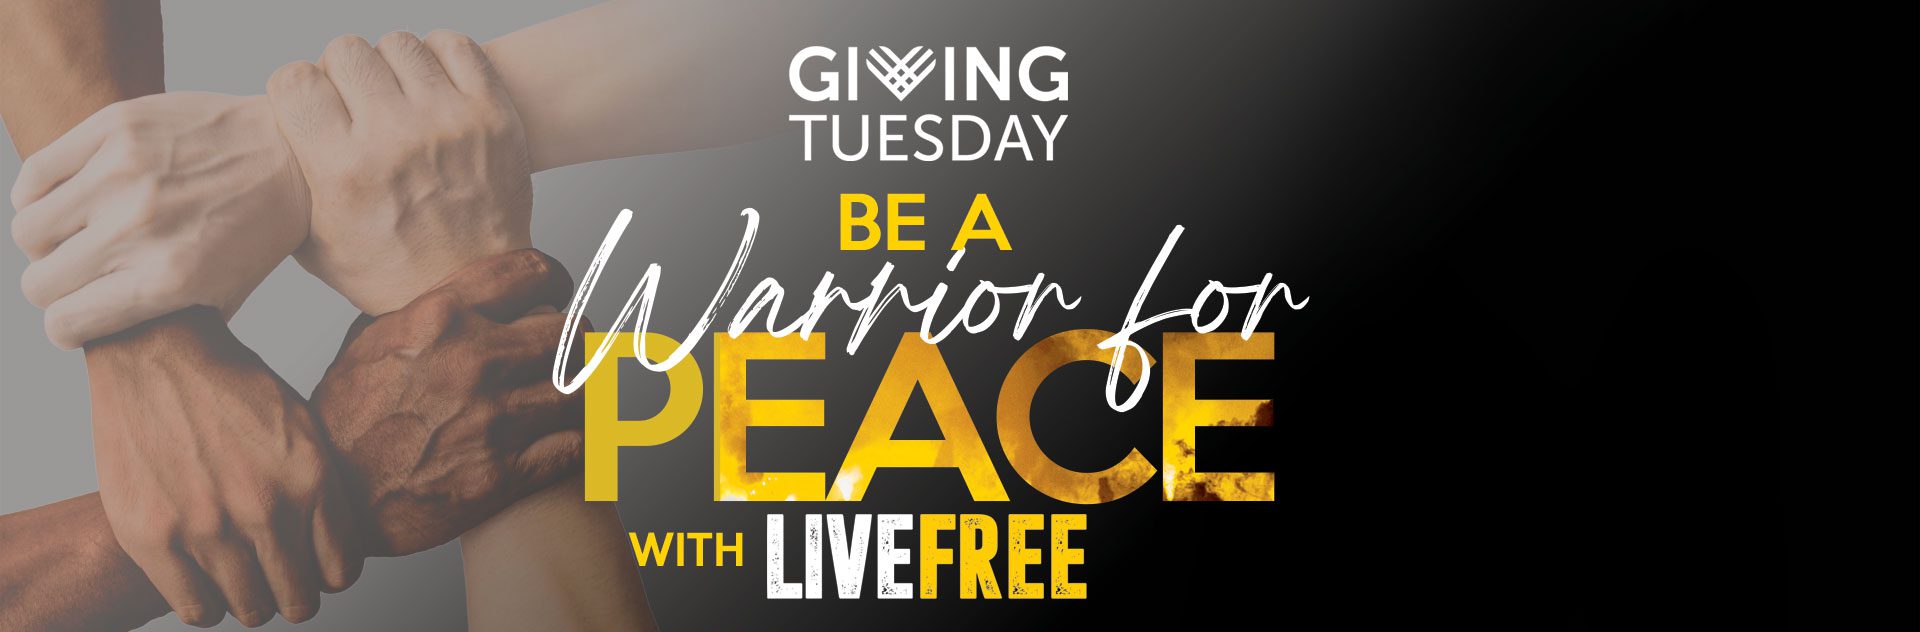 , Giving Tuesday: Be a Warrior for Peace, Live Free USA - Pastor Mike McBride